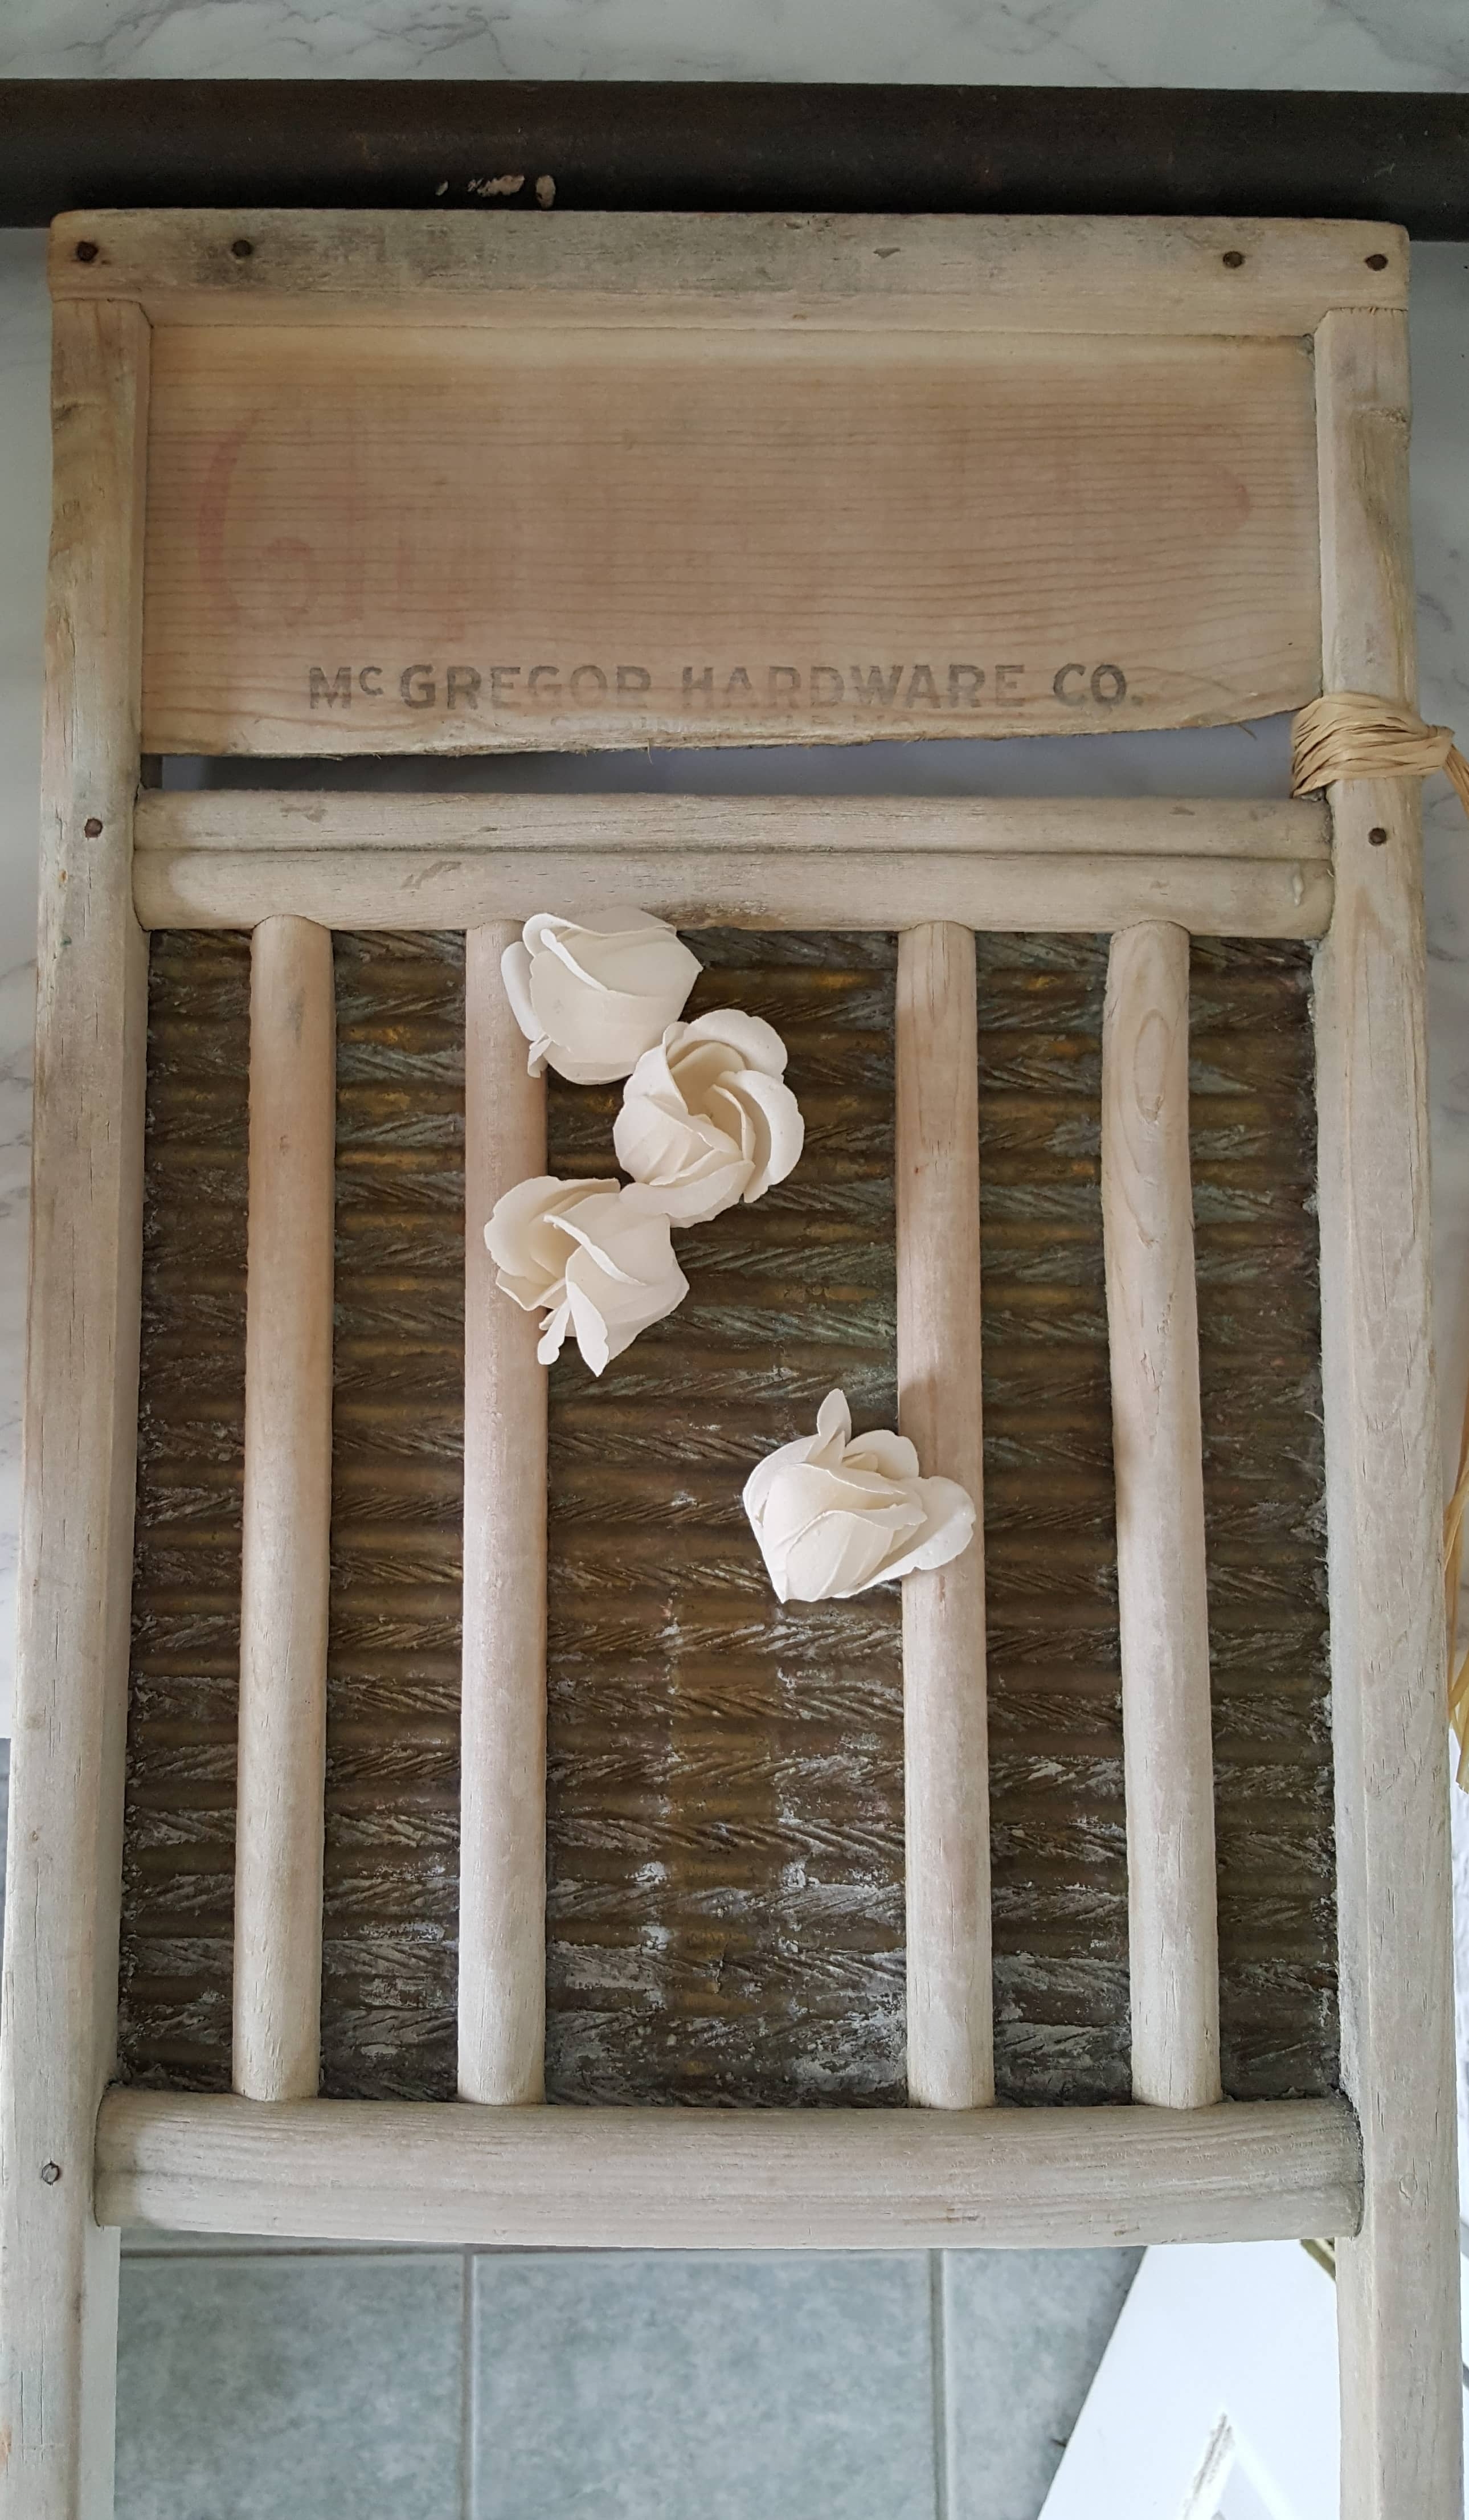 One Room Challenge Urban Industrial Vintage Laundry Room Open Shelving Gold Decor Antique wash board white roses 